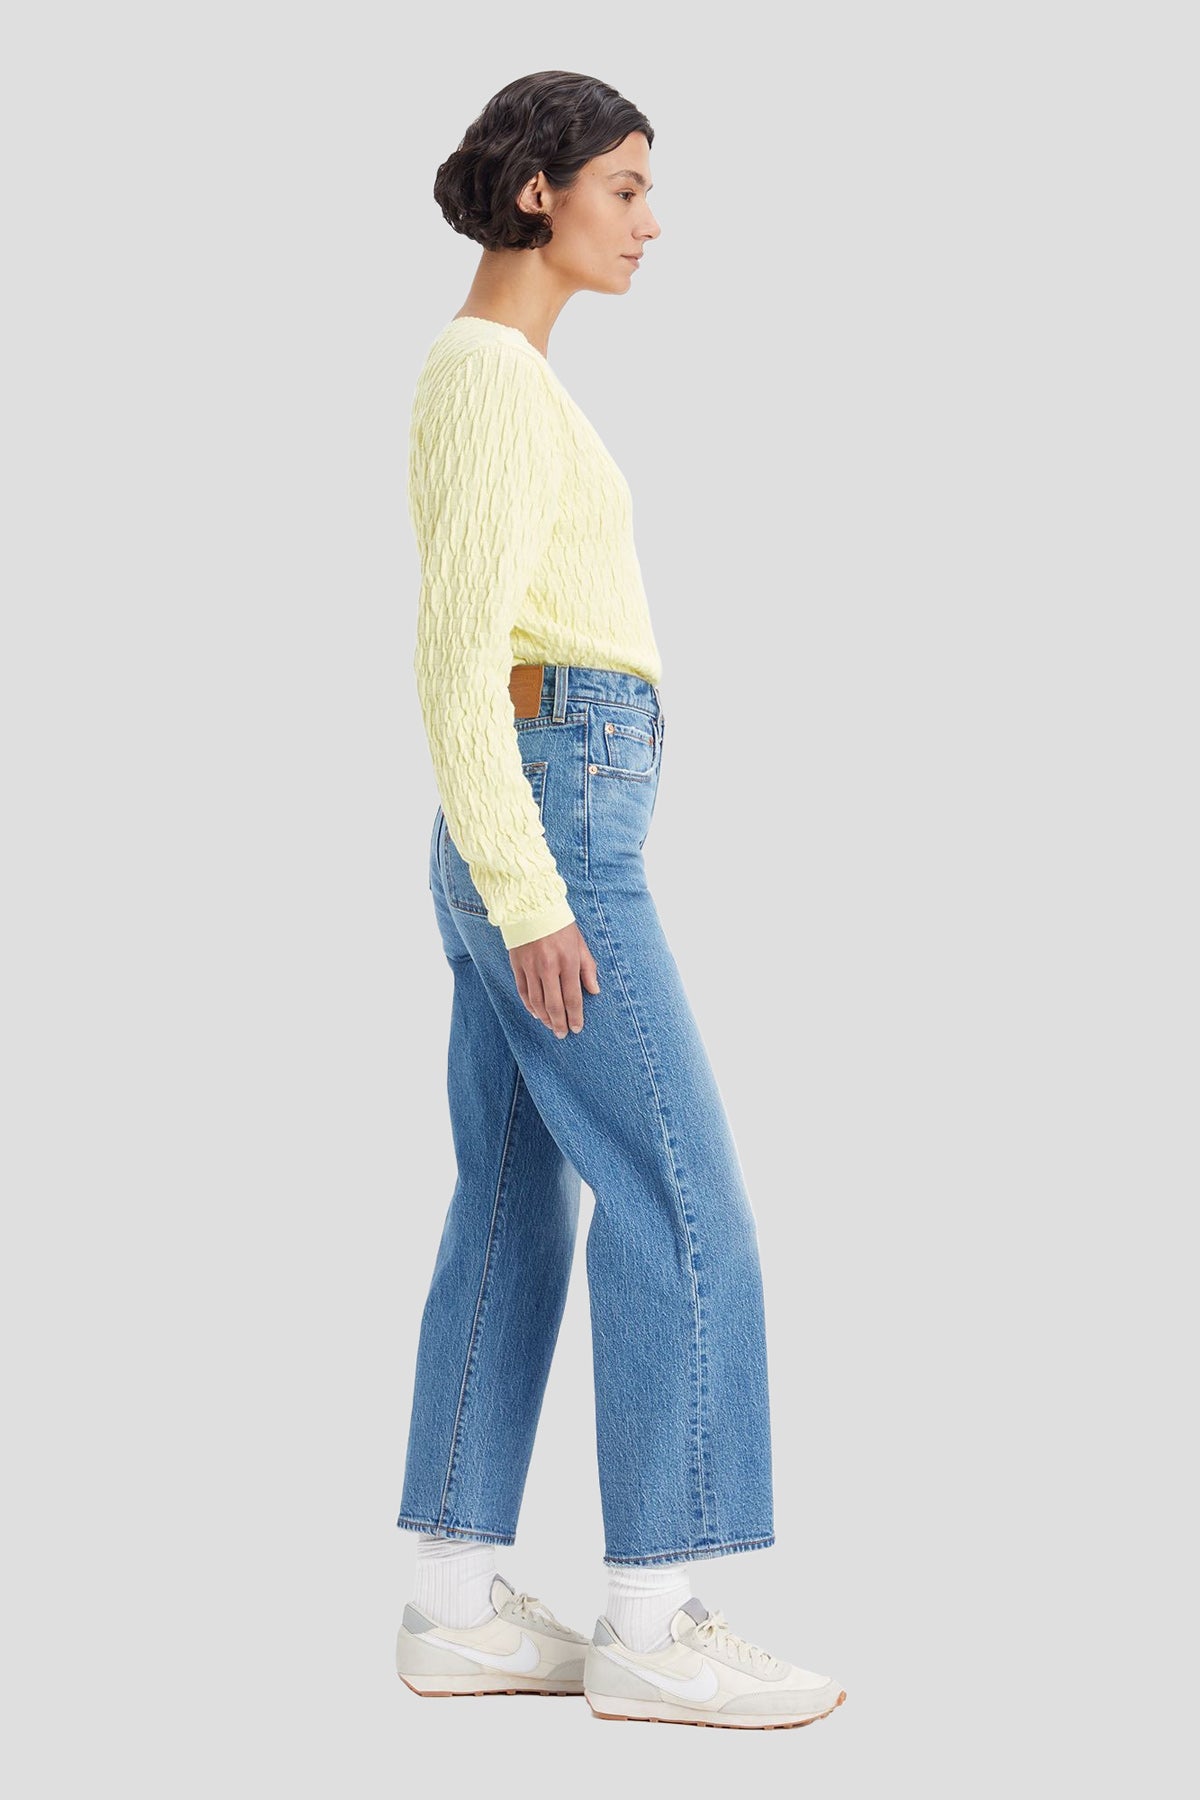 Ribcage Straight Ankle Jeans